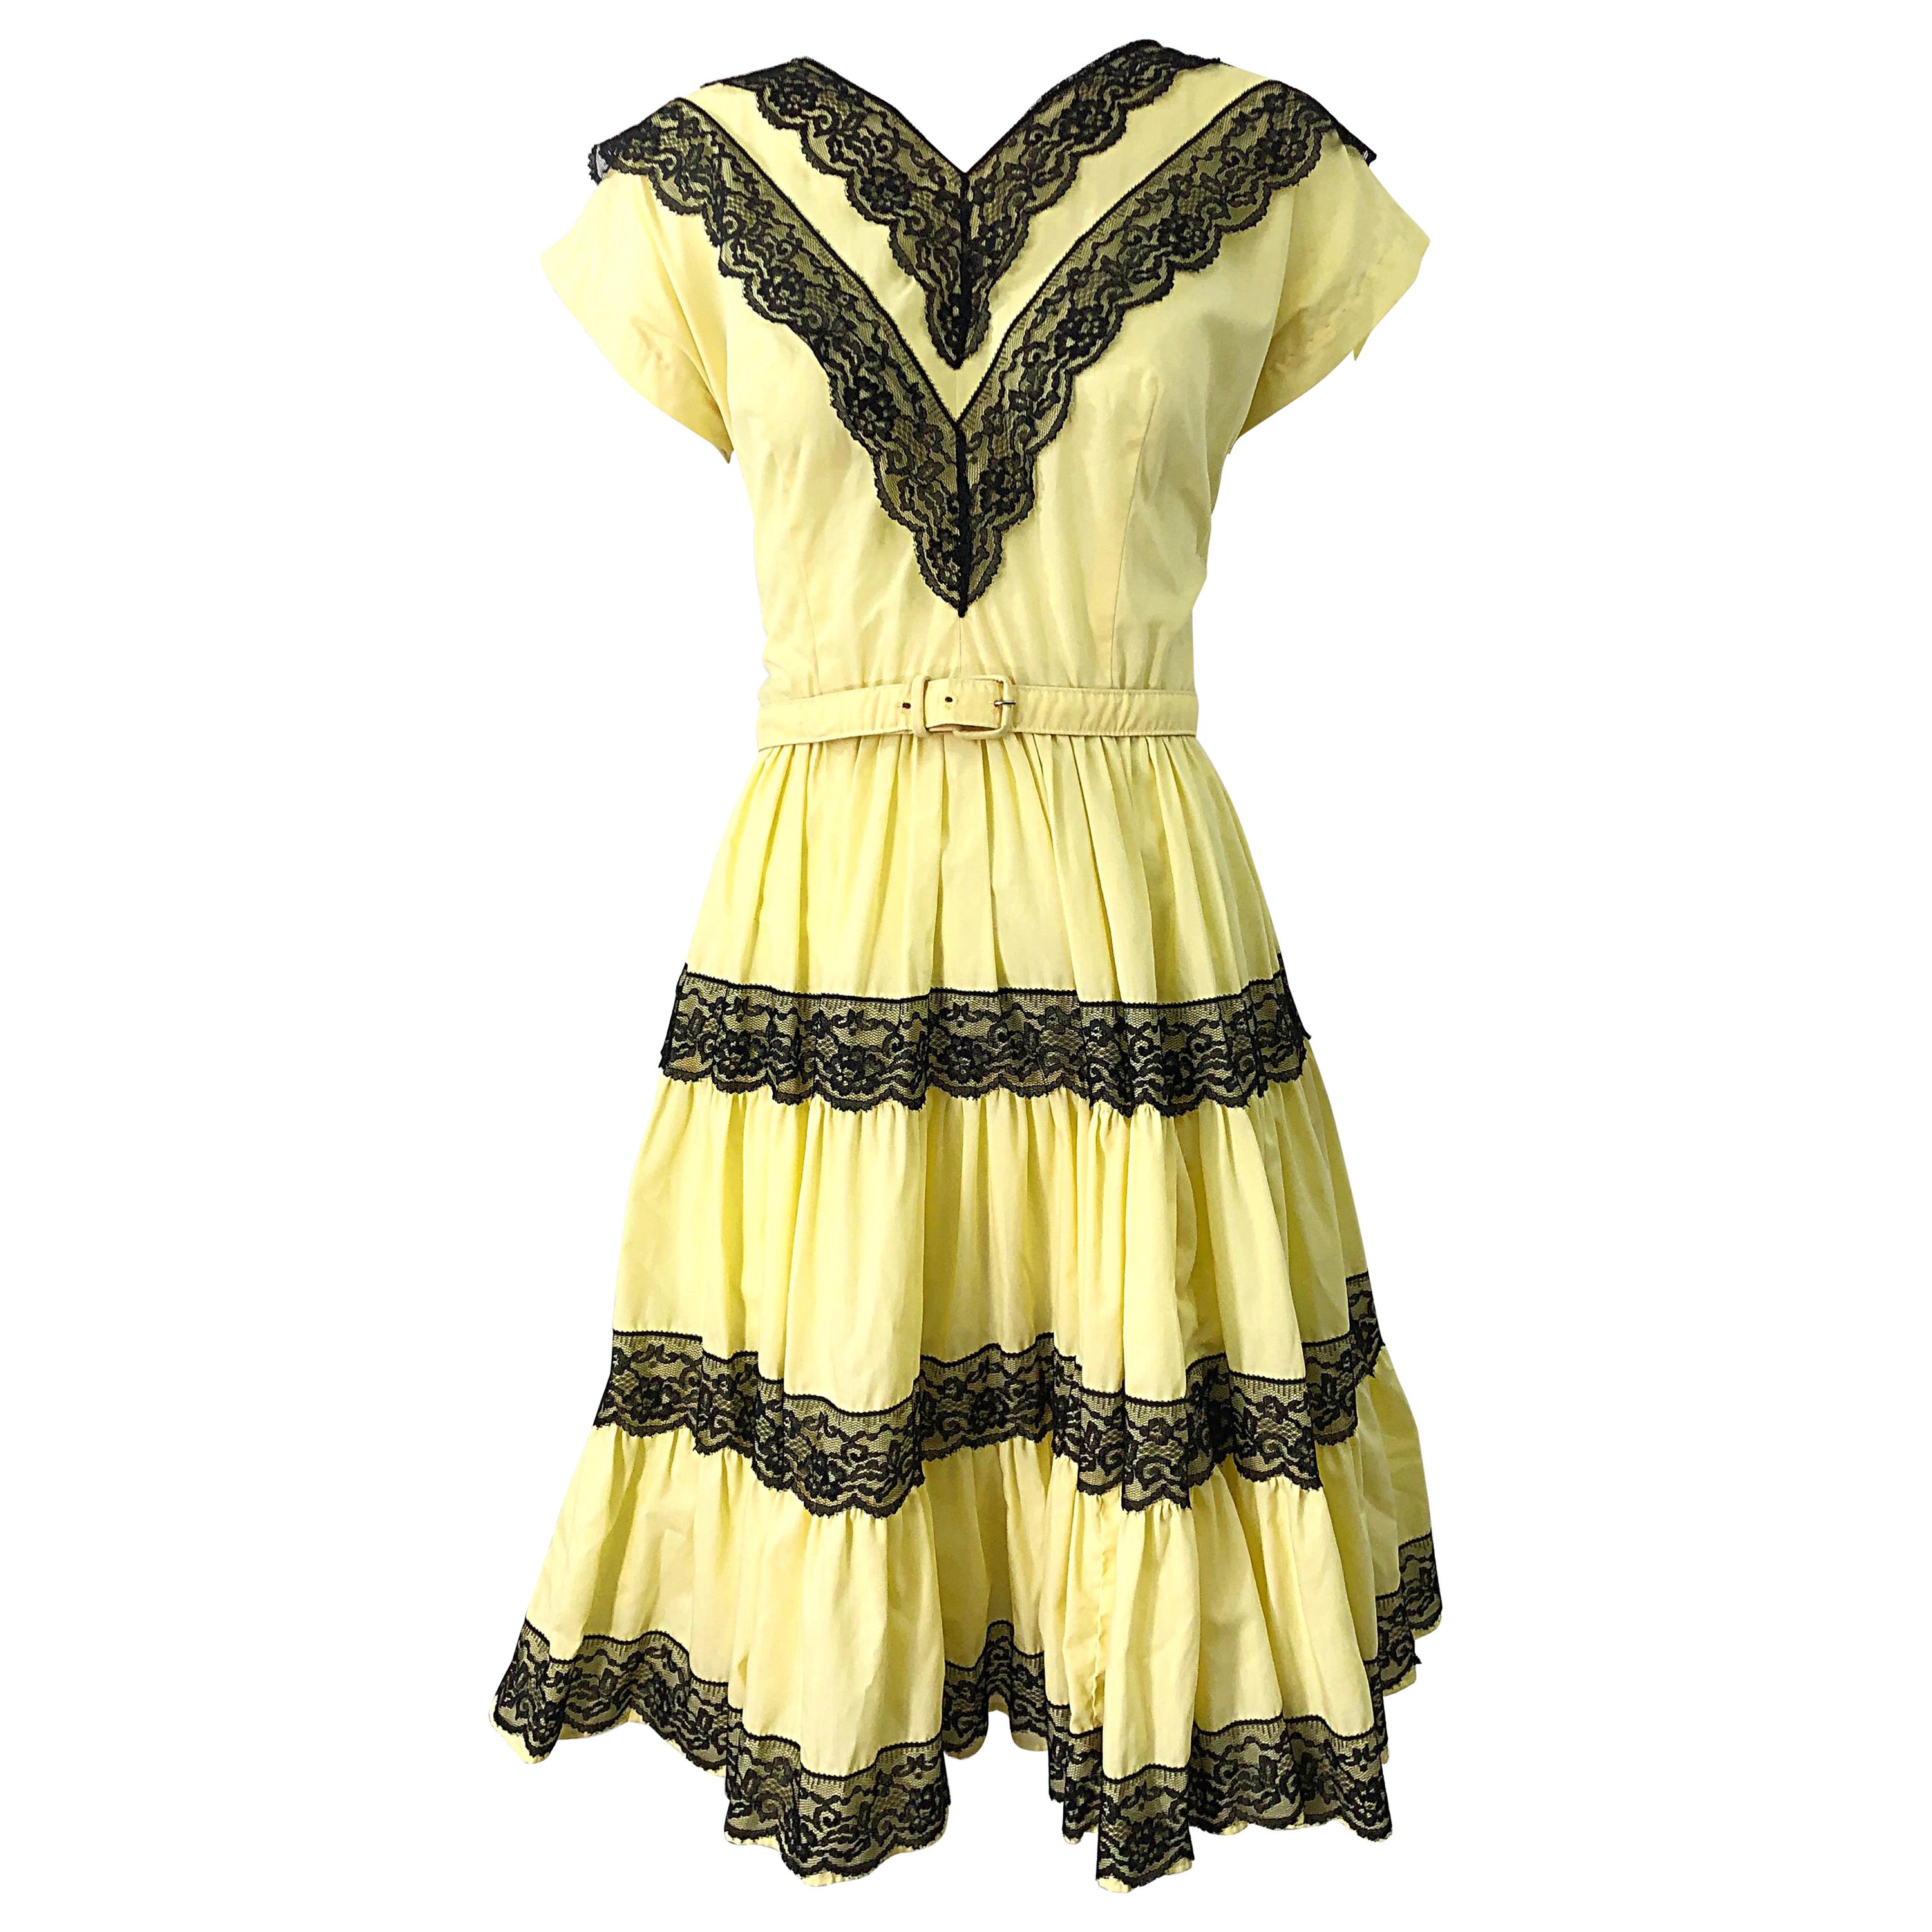 1950s Bettina of Miami Yellow + Black Cotton Lace Fit n' Flare Vintage 50s Dress